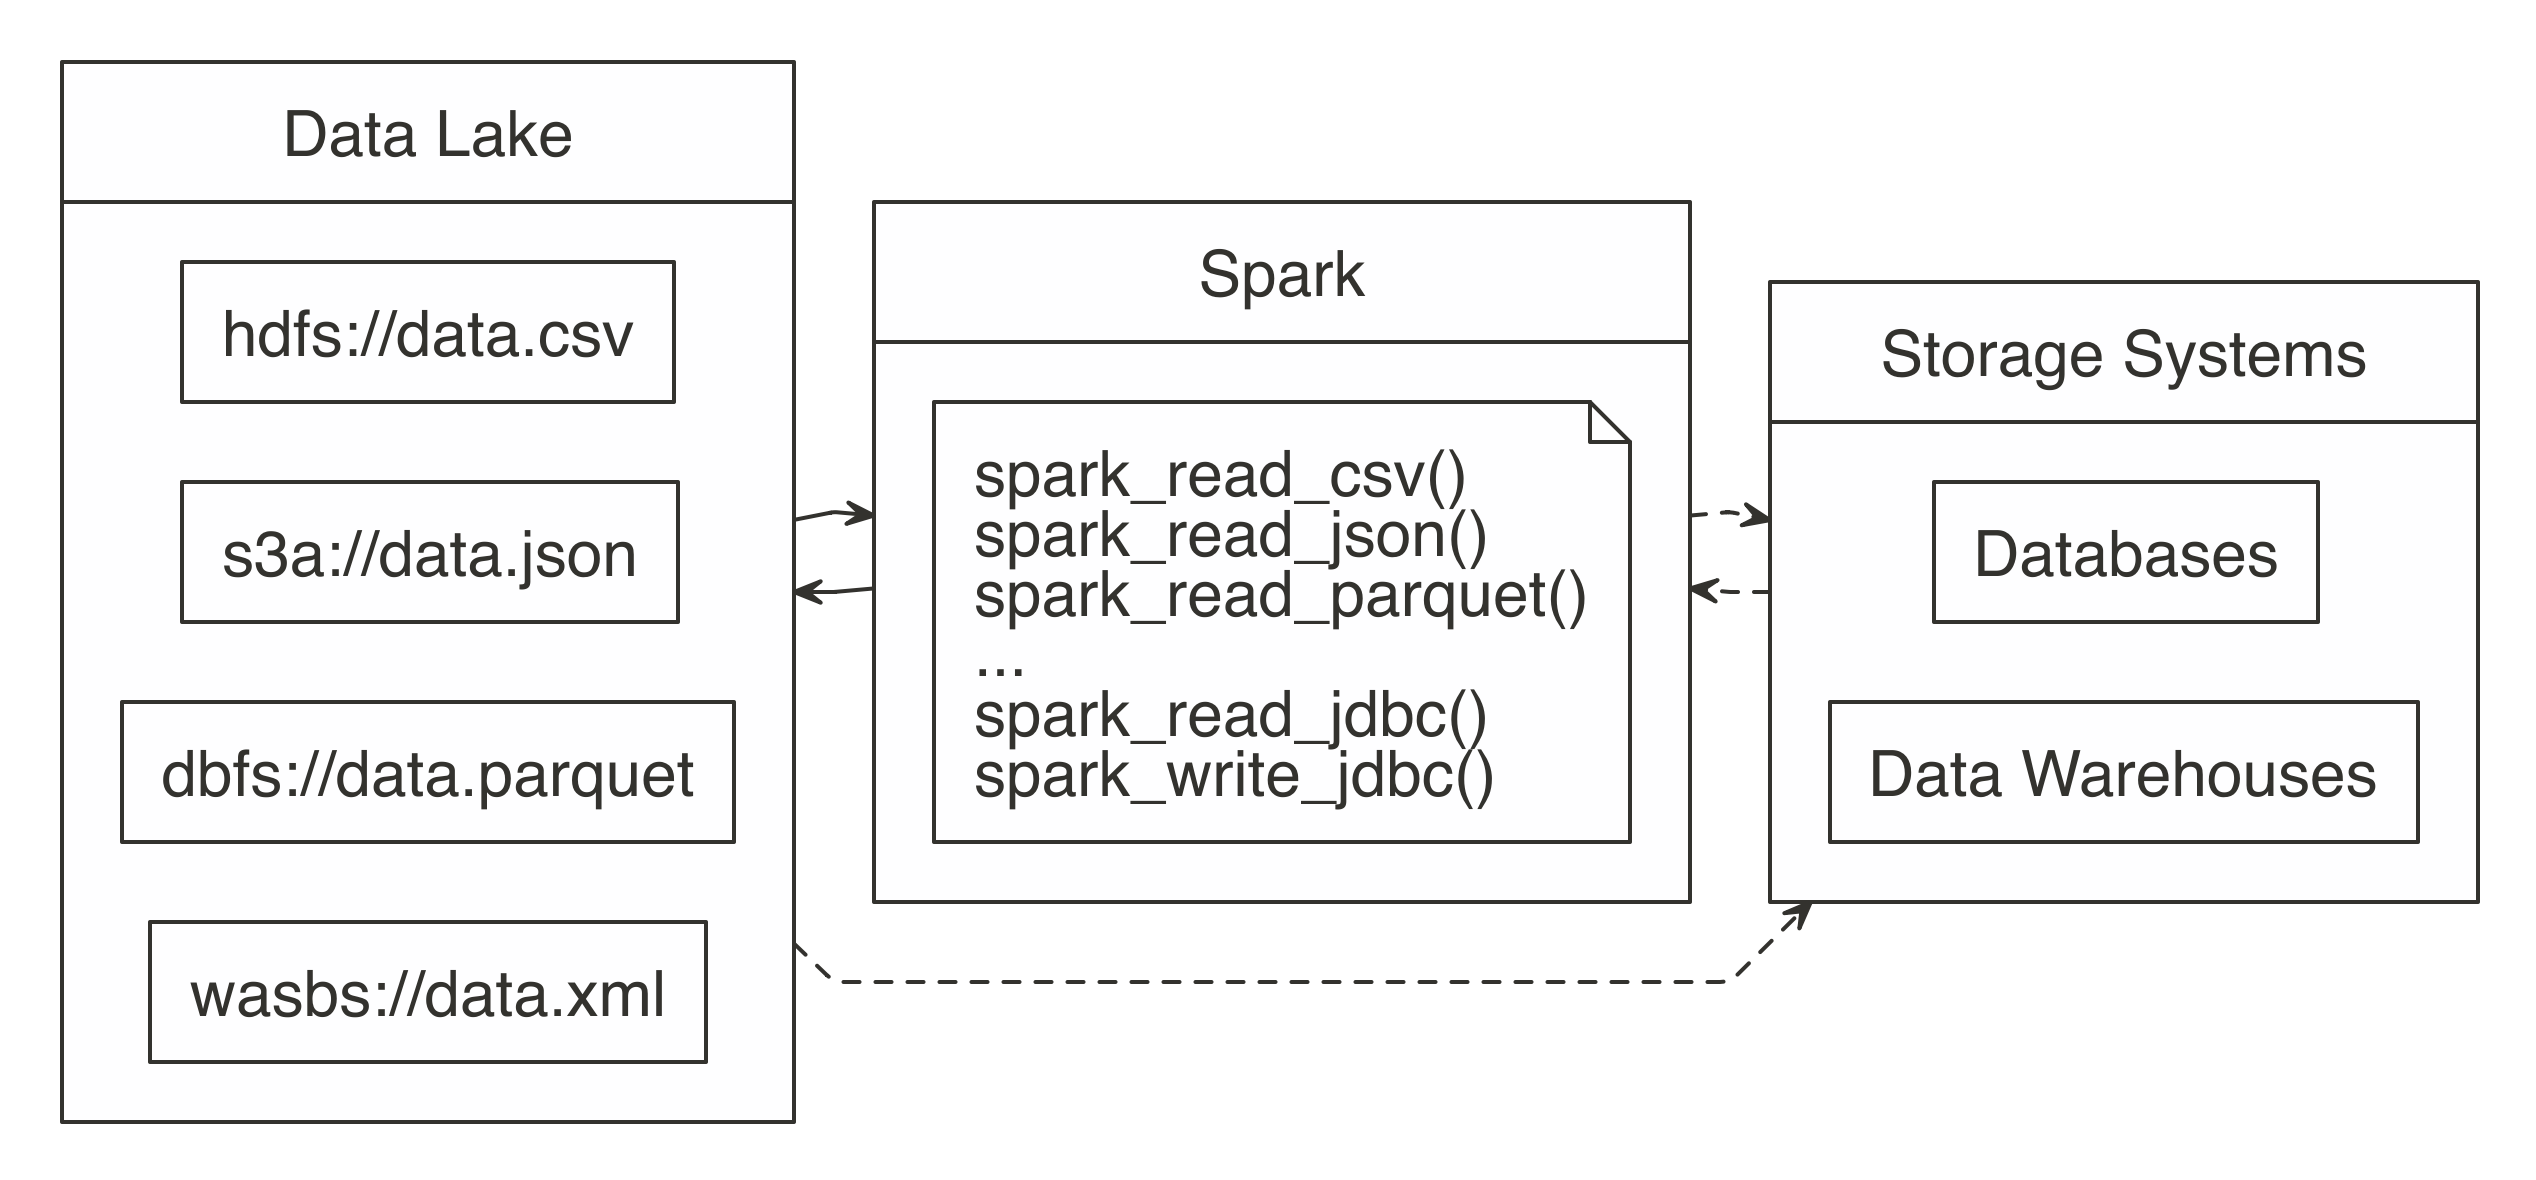 Spark processing raw data from a data lakes, databases, and data warehouses